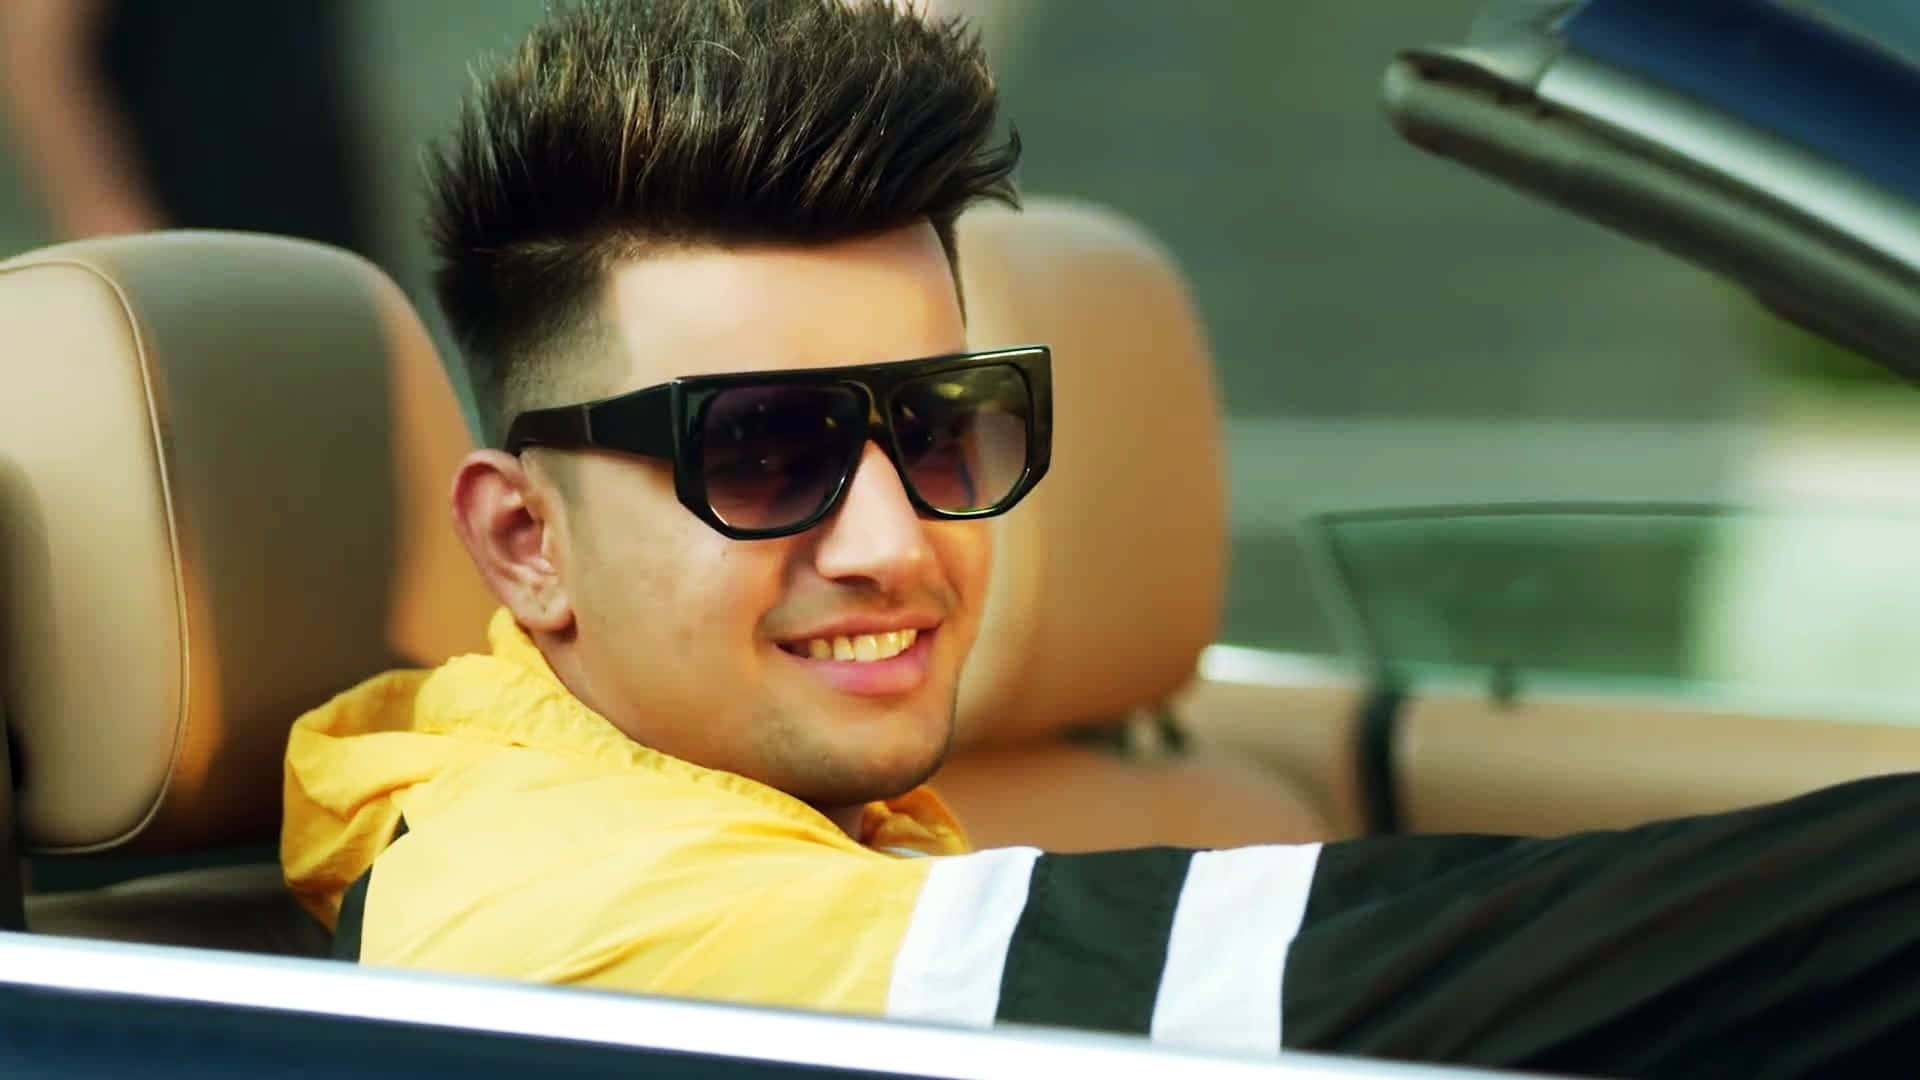 A Man In A Yellow Car With Sunglasses